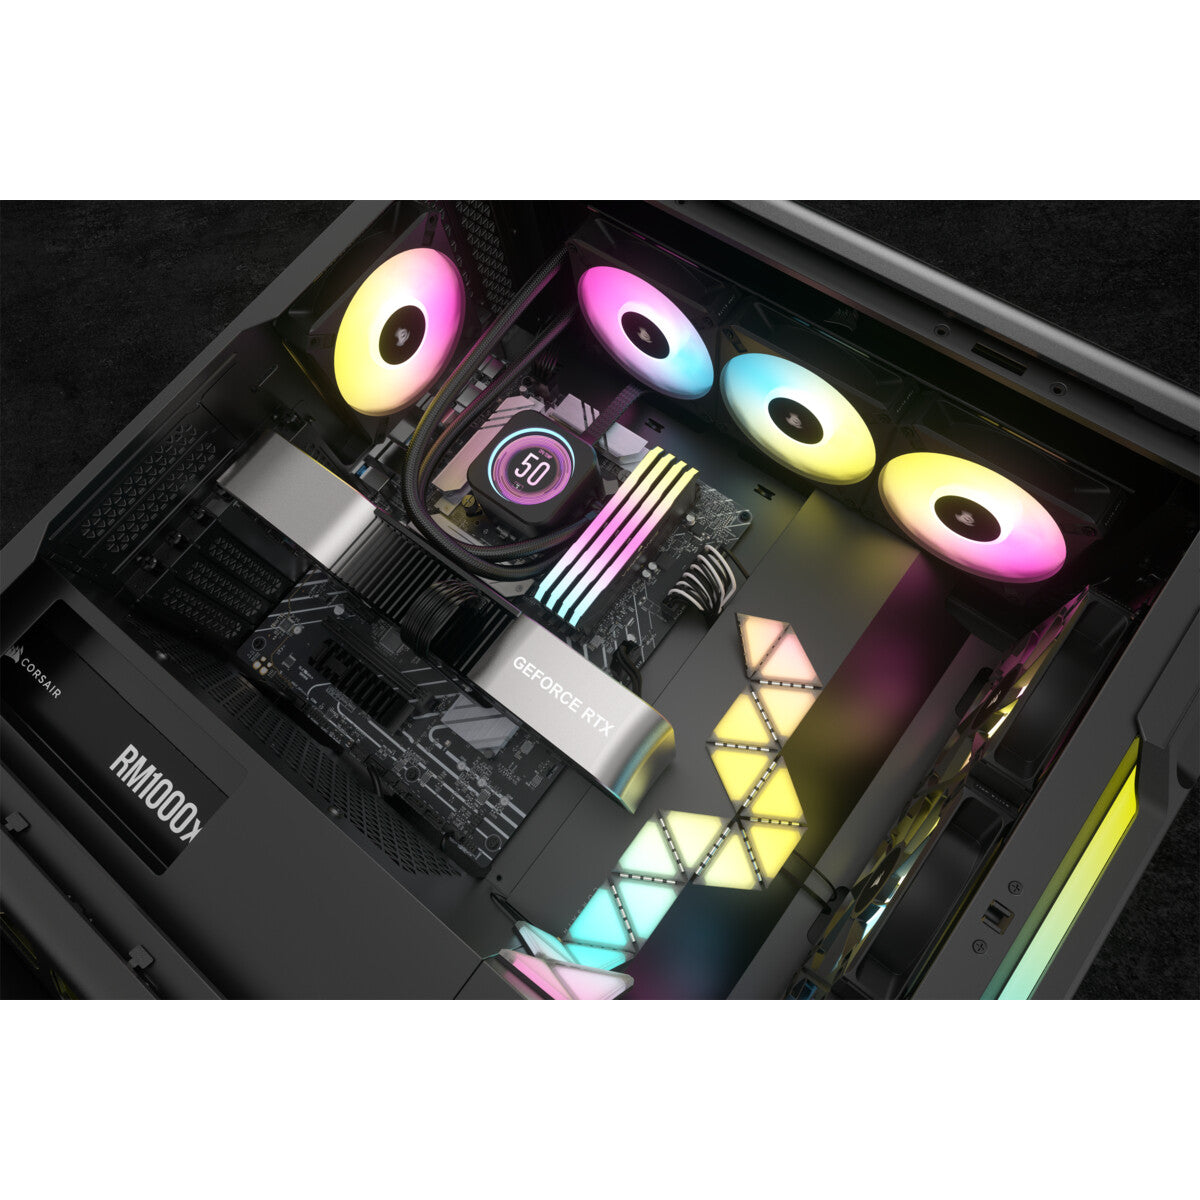 Corsair iCUE H150i ELITE LCD XT Display - All-in-one Liquid Processor Cooler in Black - 360mm